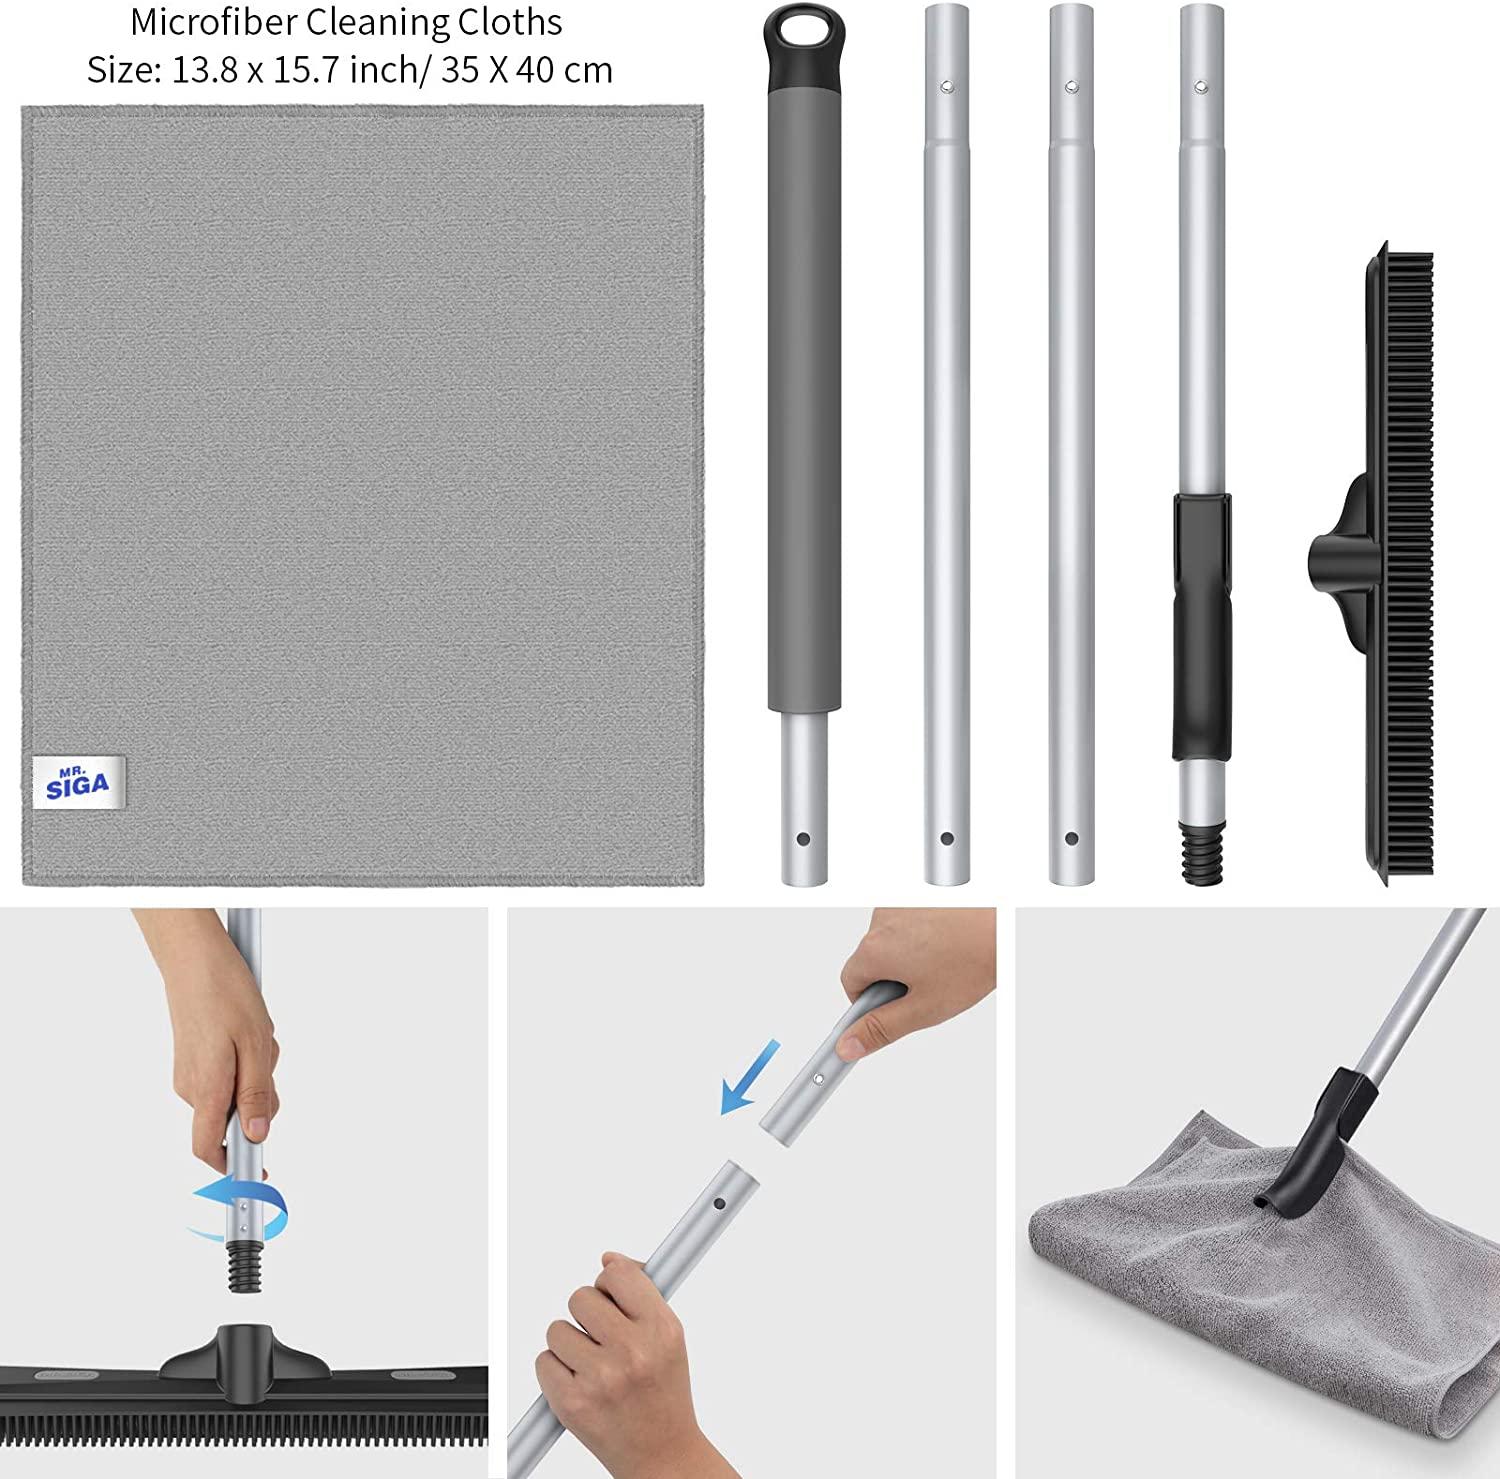 MR.SIGA Pet Hair Removal Rubber Broom with Built in Squeegee, 2 in